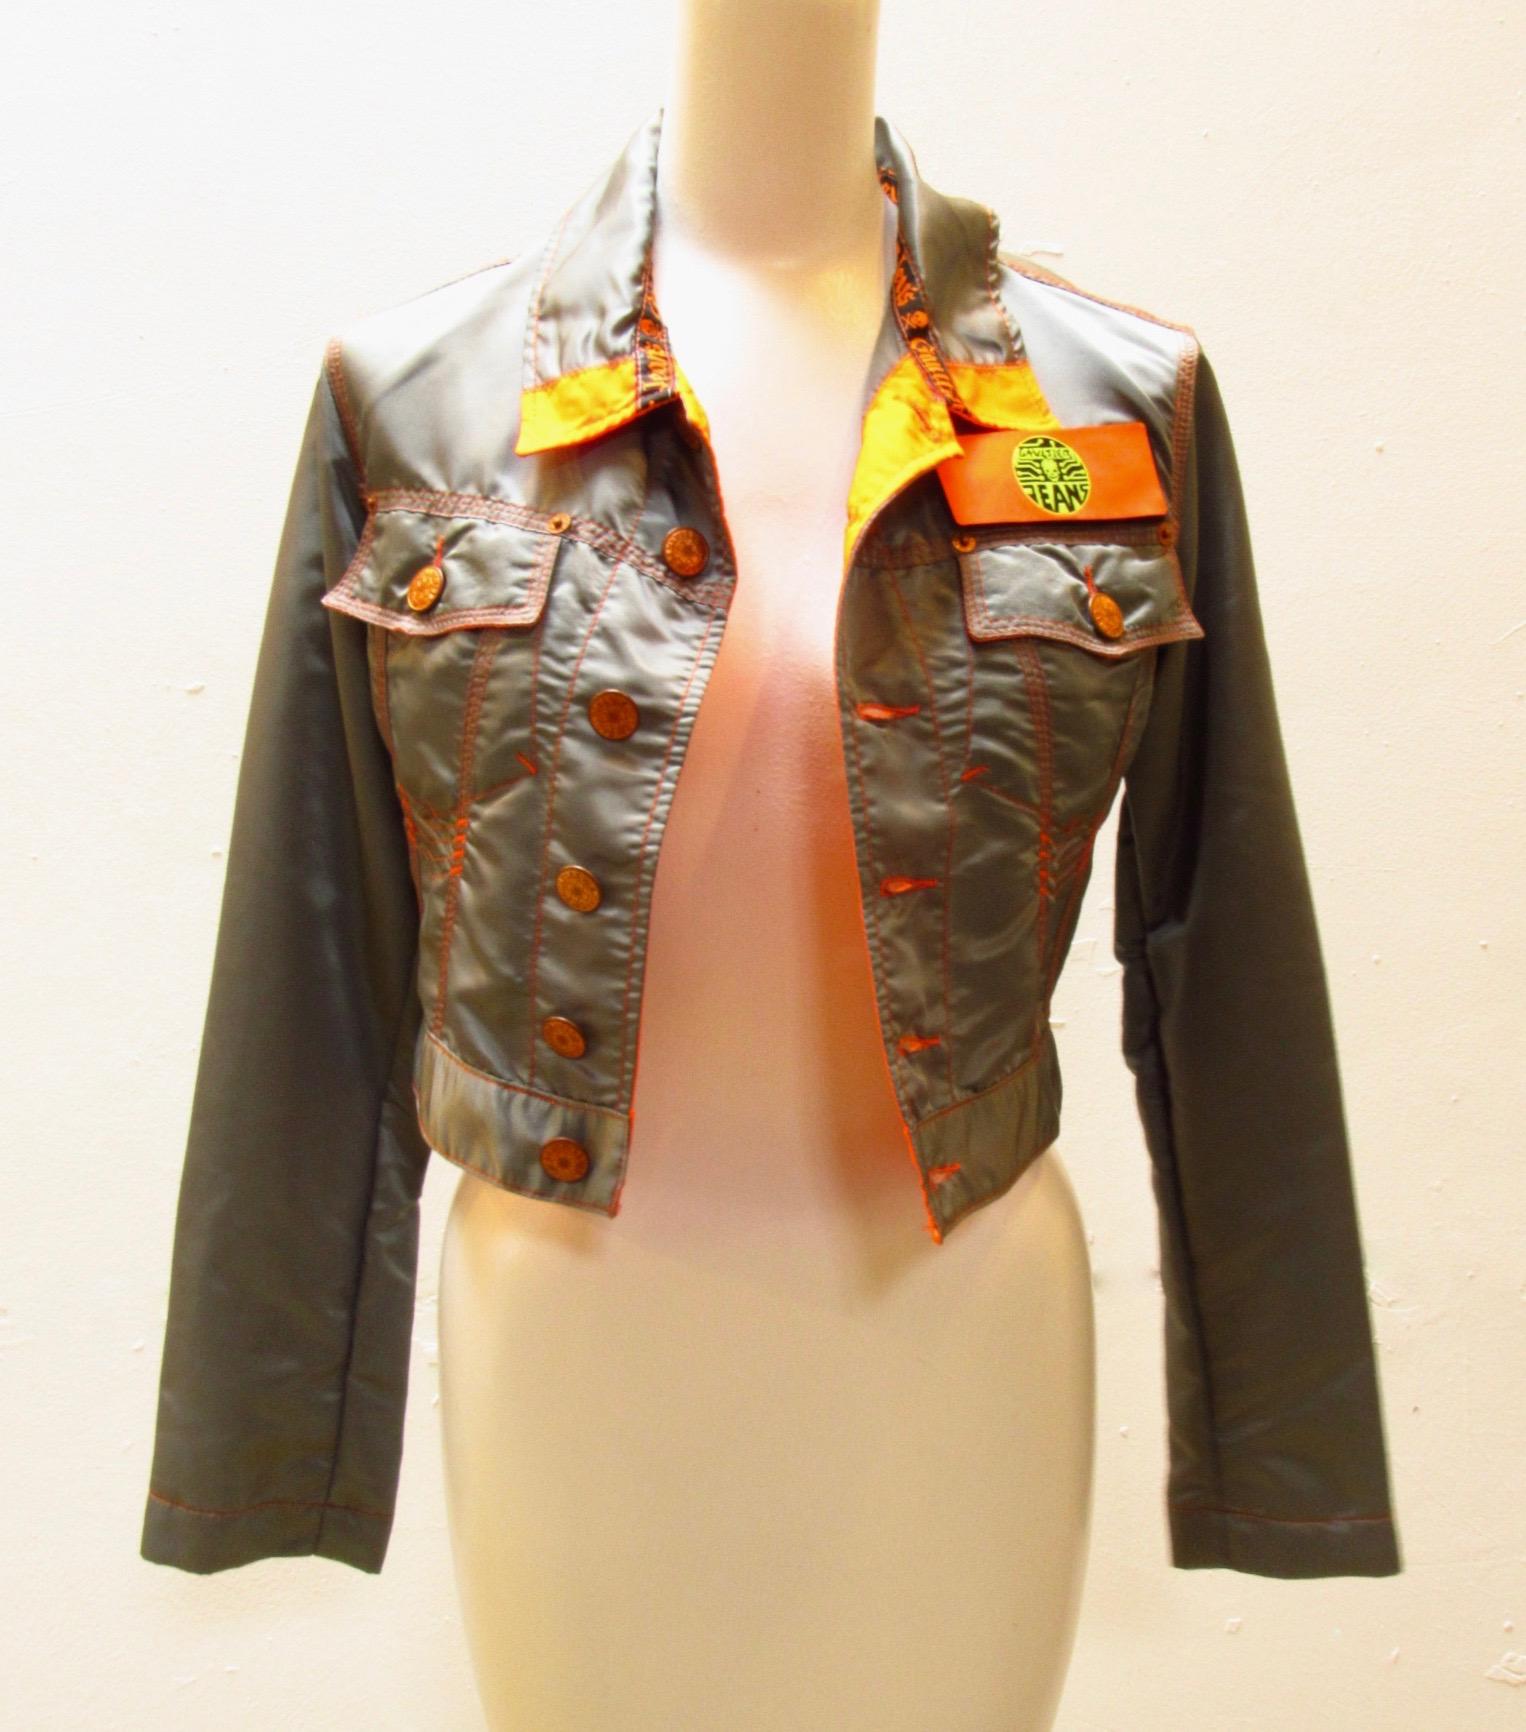 Cropped dark grey nylon jacket from vintage Jean Paul Gaultier is a standout with its orange seams, contrast stitching, and removable velcro JPG patch. Sleeves feature columns of buttons and back boasts a buckle that allows for an adjustable fit.  